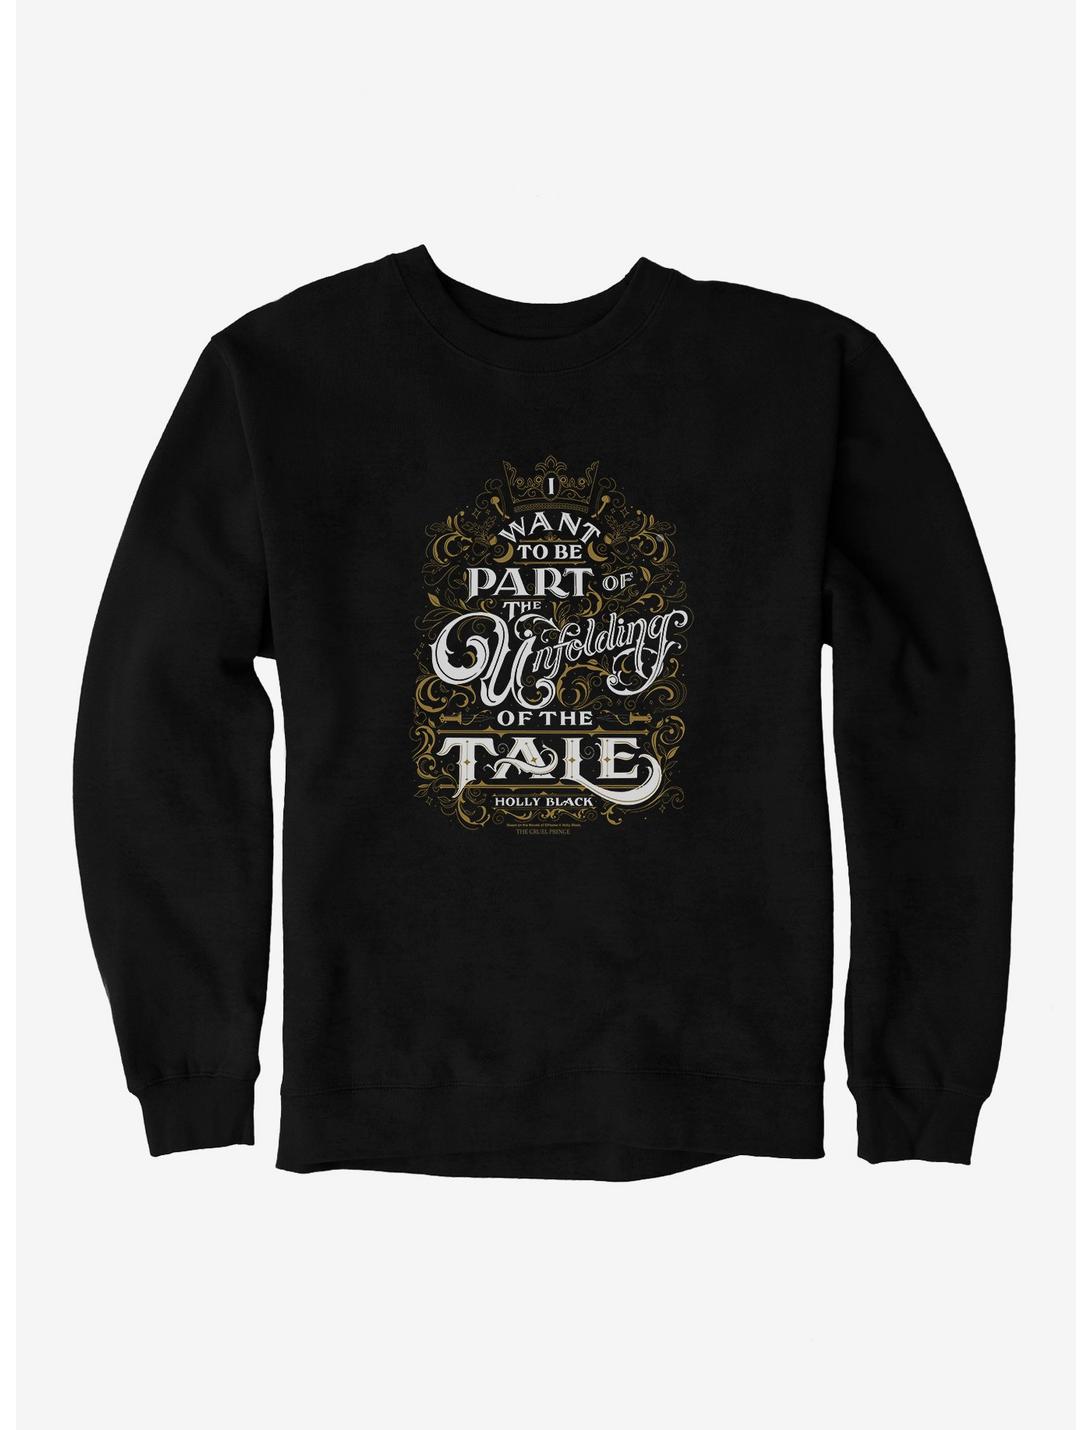 The Cruel Prince Sinister Enchantment Collection: Unfolding Of The Tale Sweatshirt , BLACK, hi-res